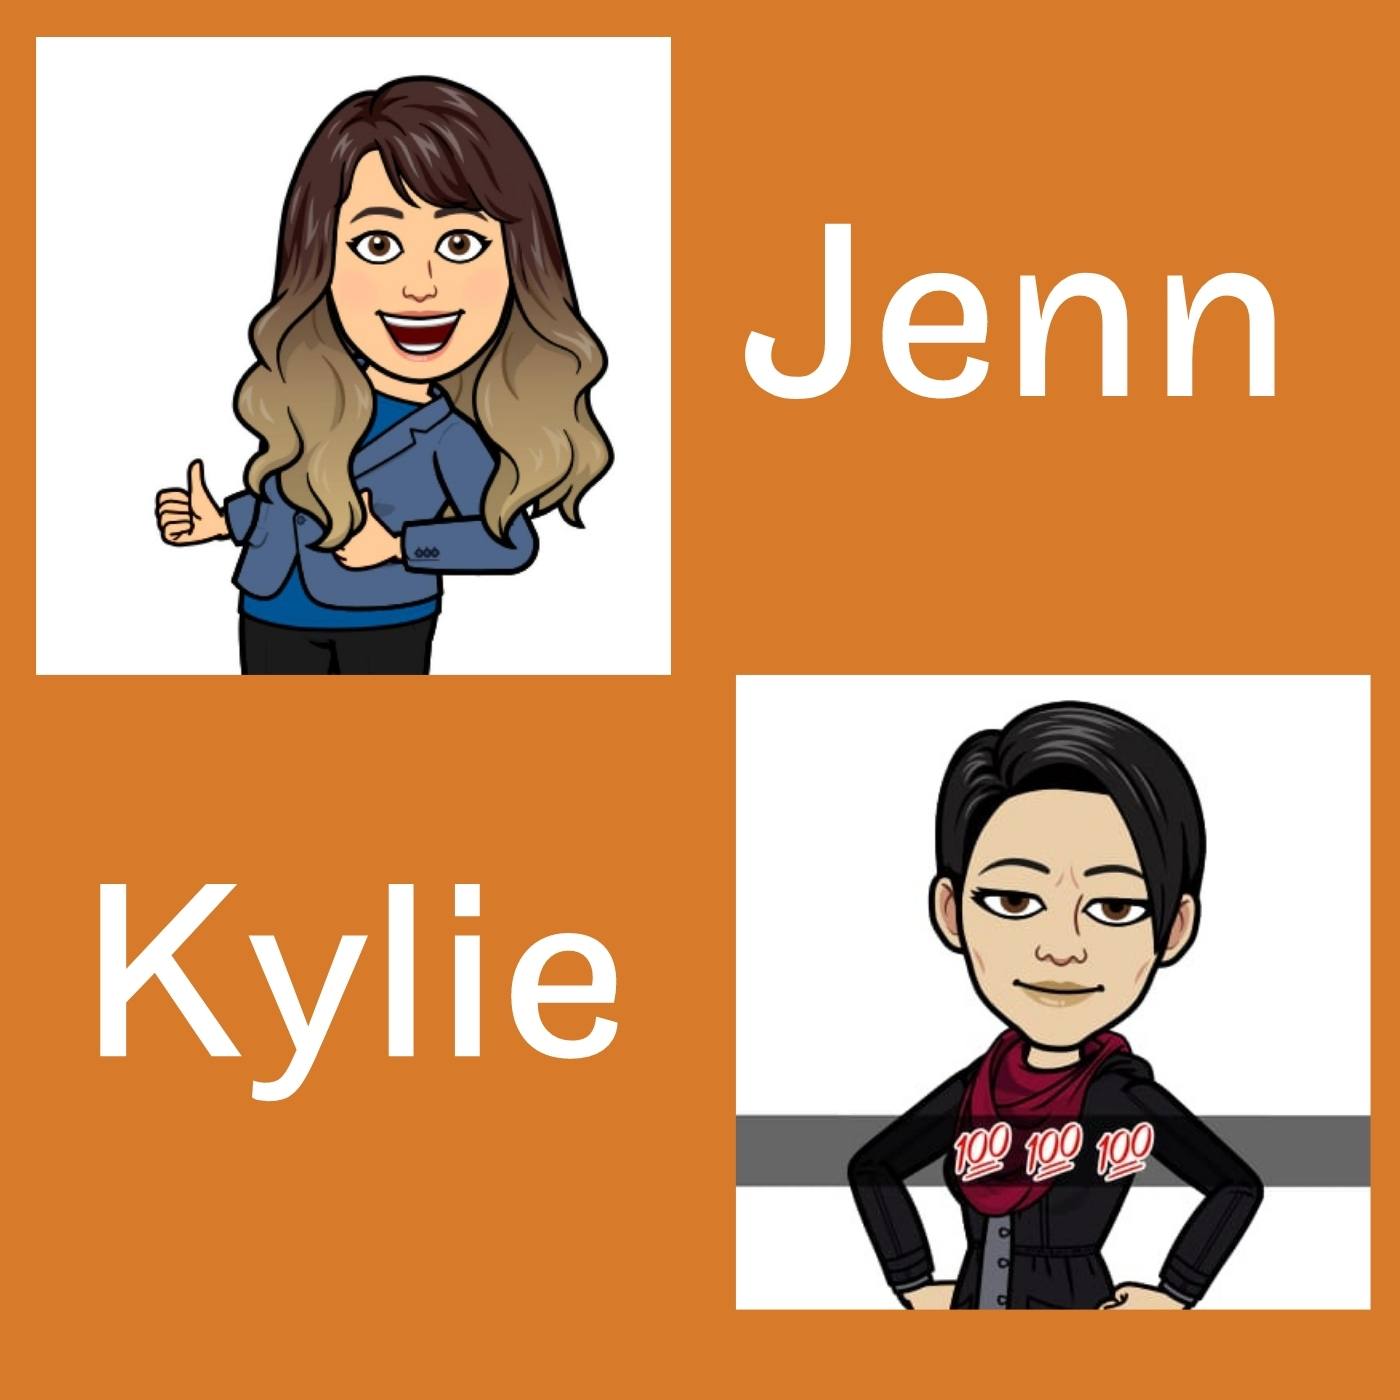 Episode 1: Jenn and Kylie